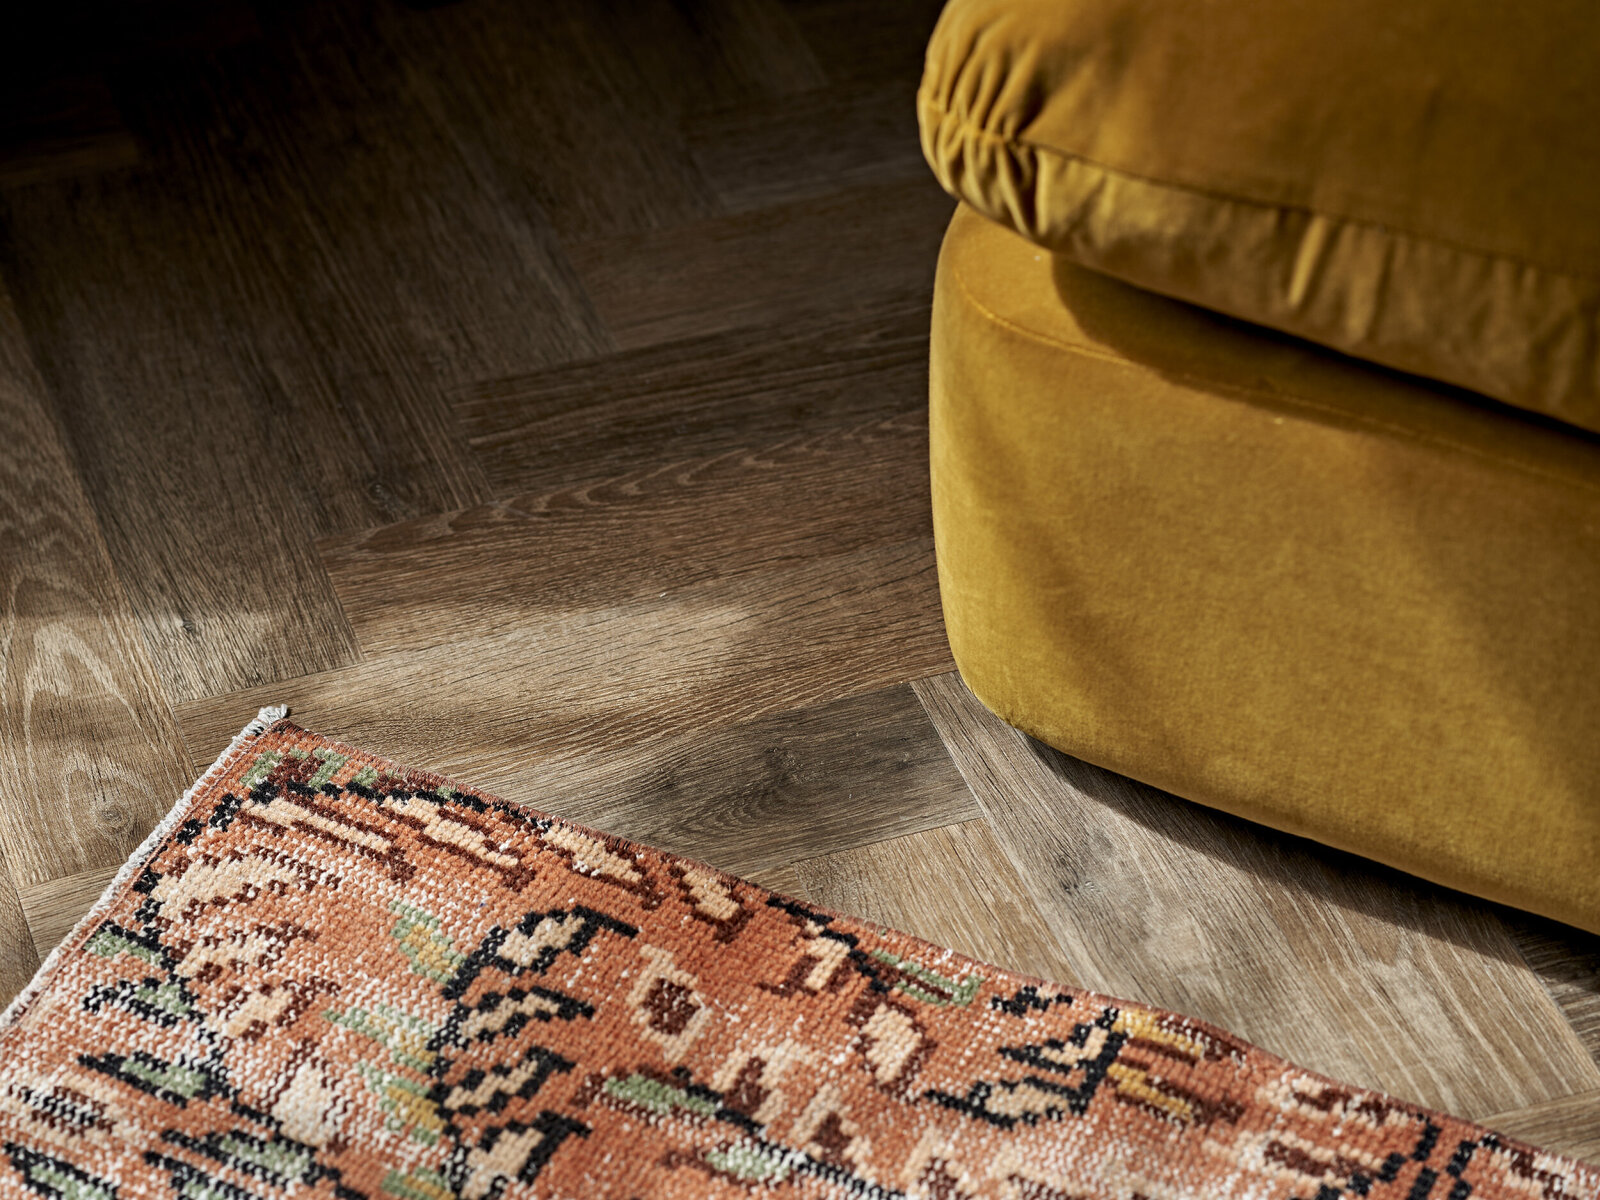 Peach and floral rug on wooden floor with mustard yellow ottoman